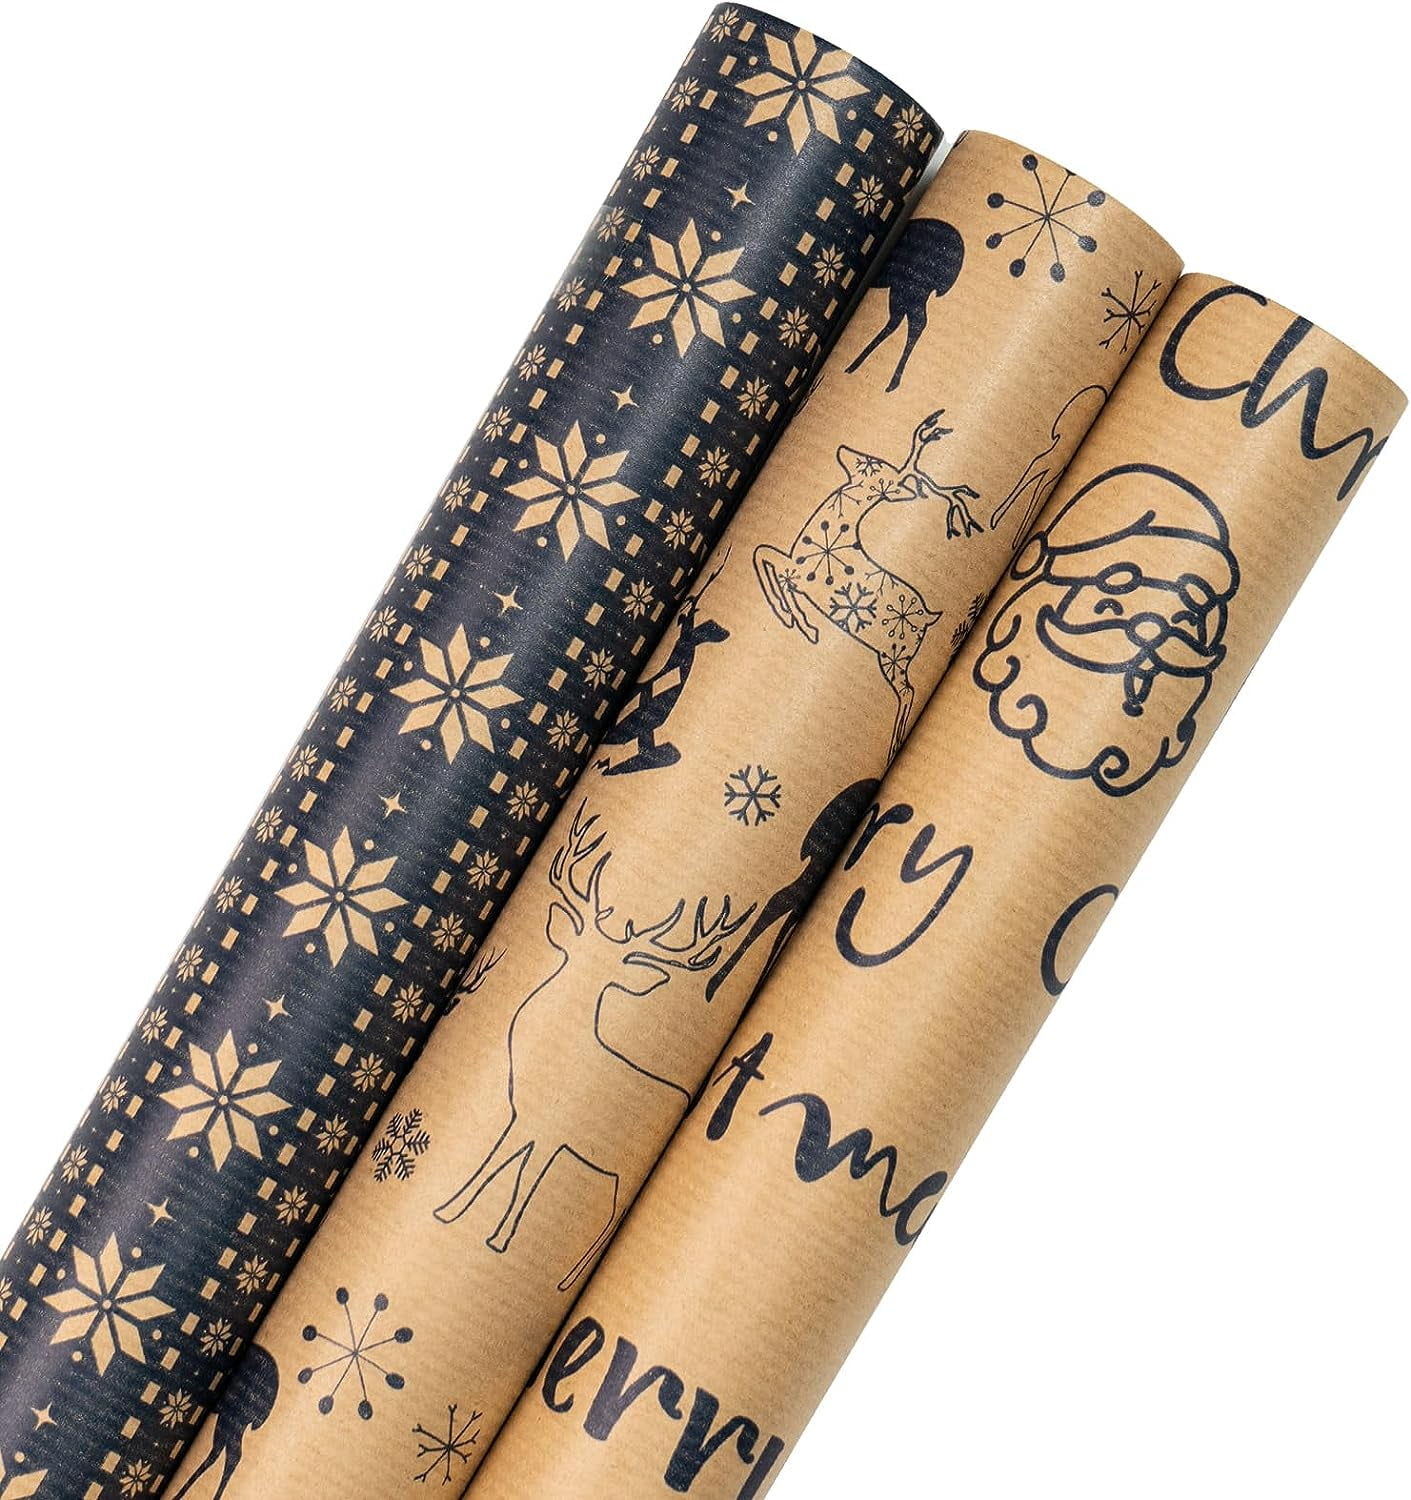 RUSPEPA Christmas Wrapping paper - Brown Kraft Paper with Red and